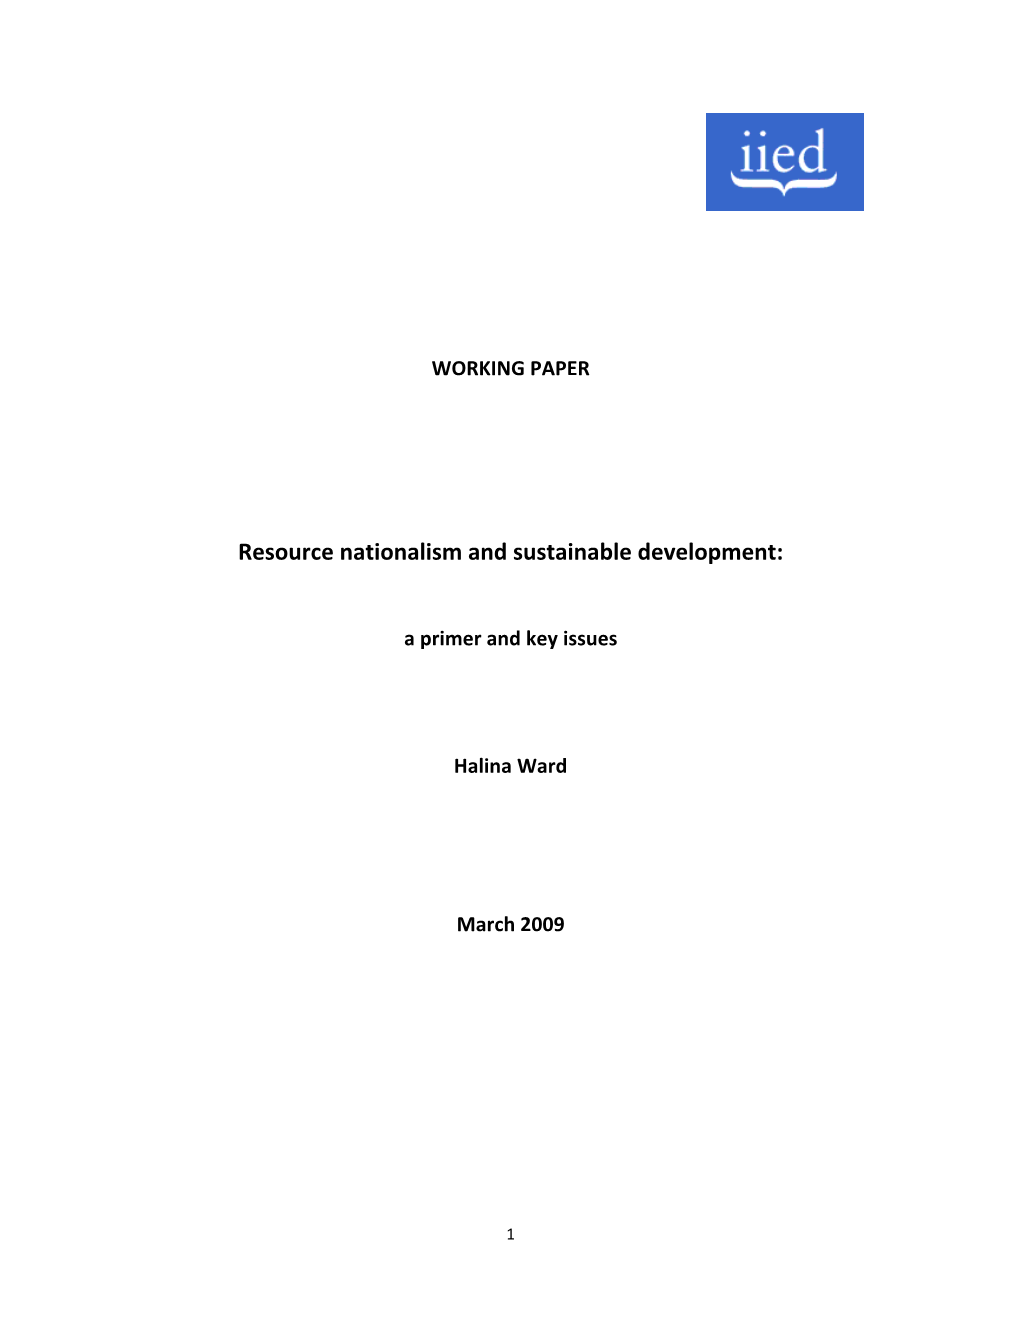 Resource Nationalism and Sustainable Development